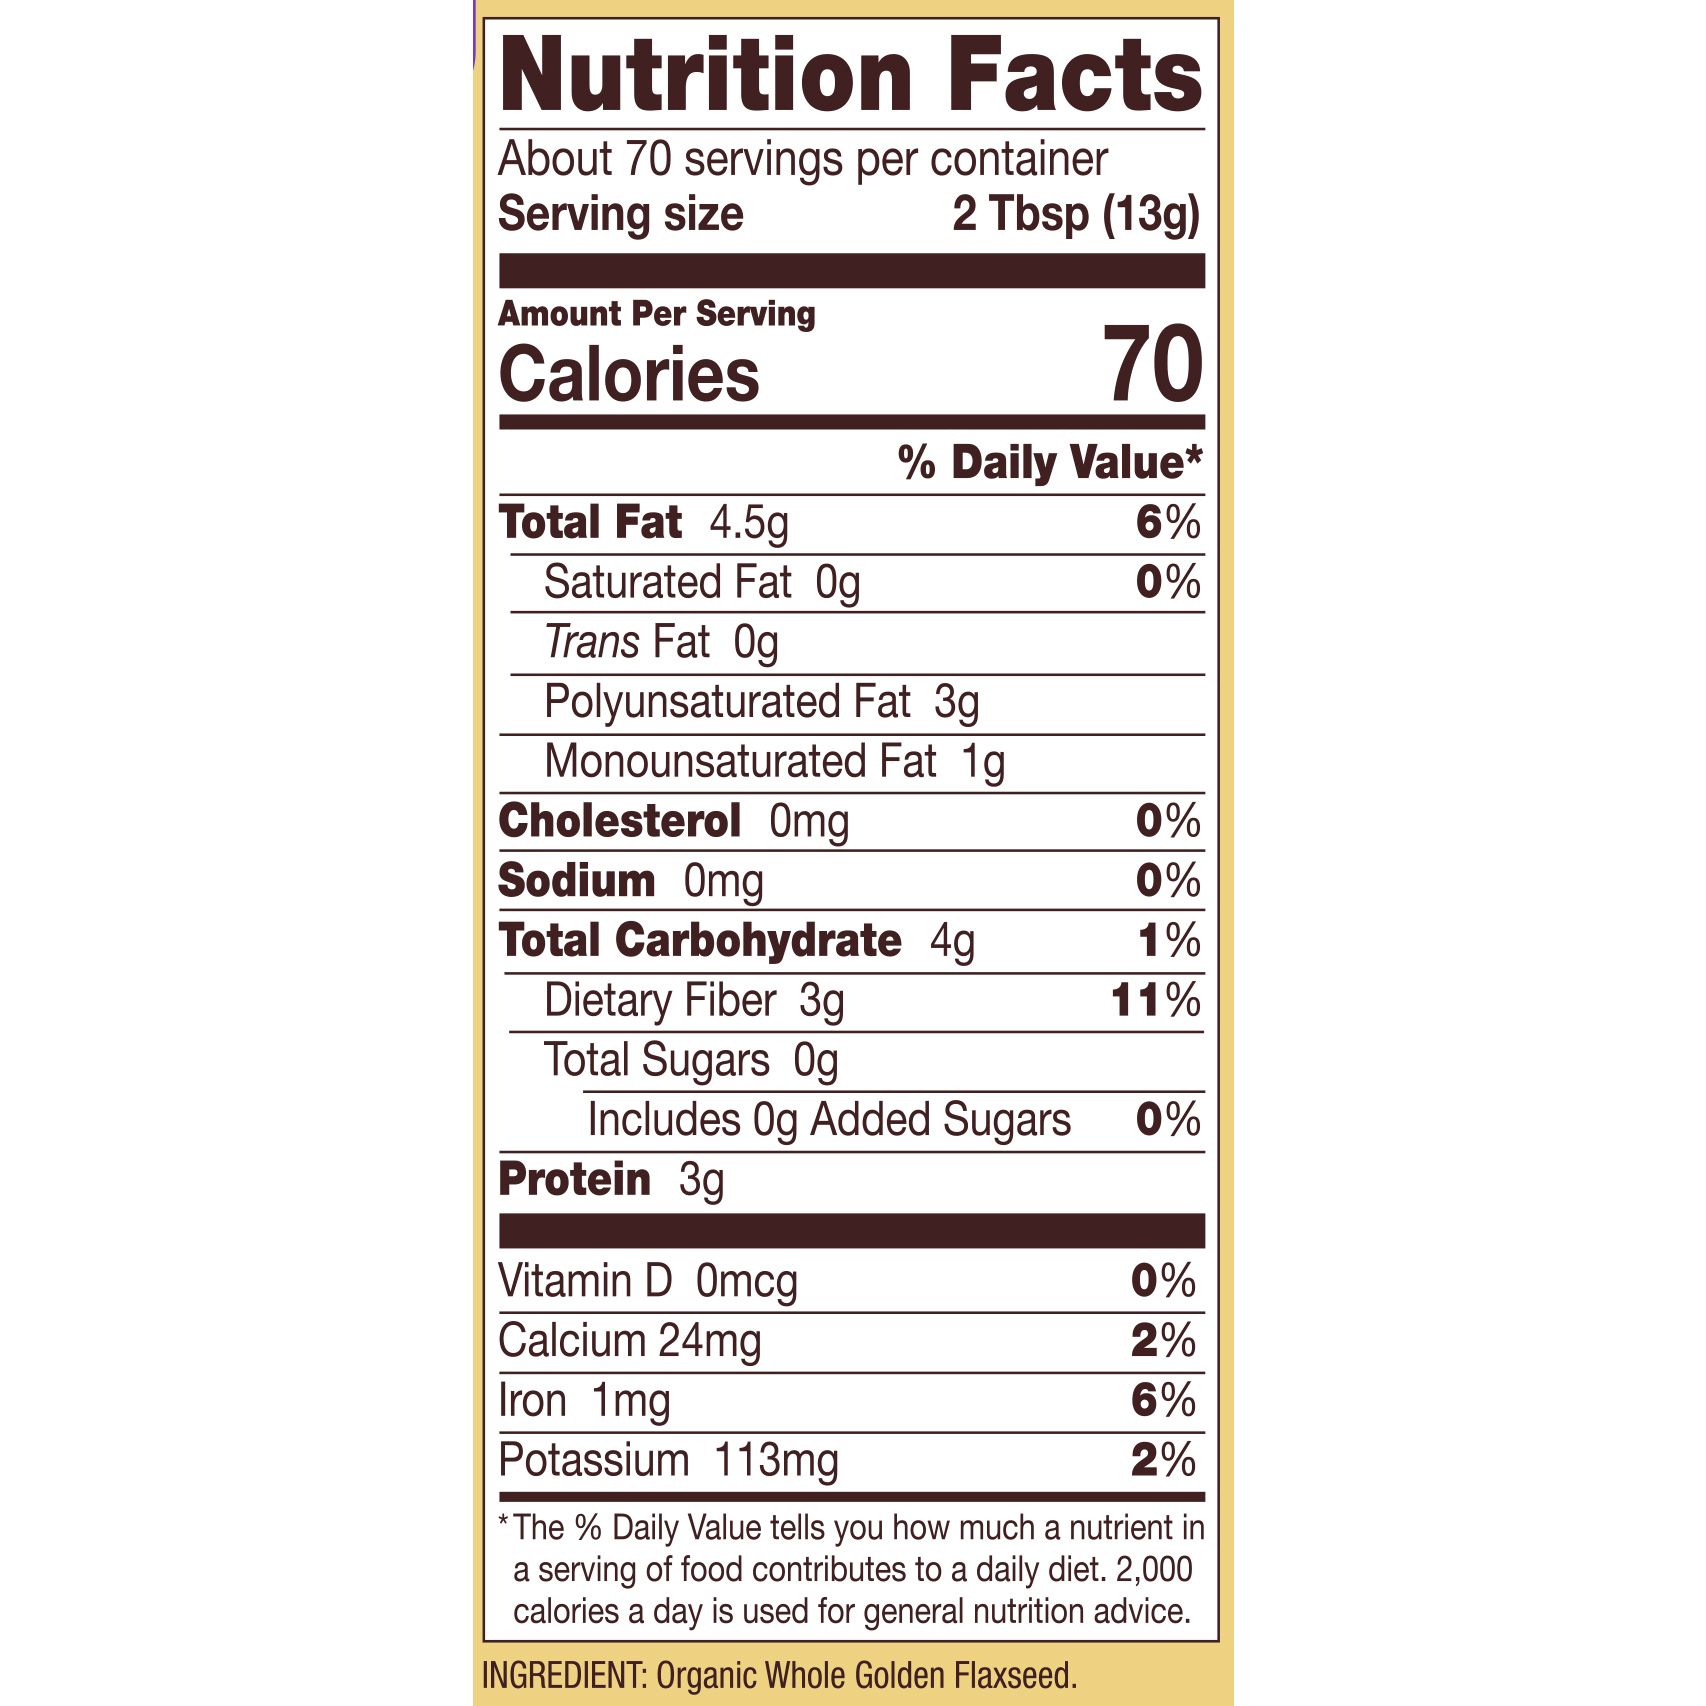 Flaxseed nutrition facts